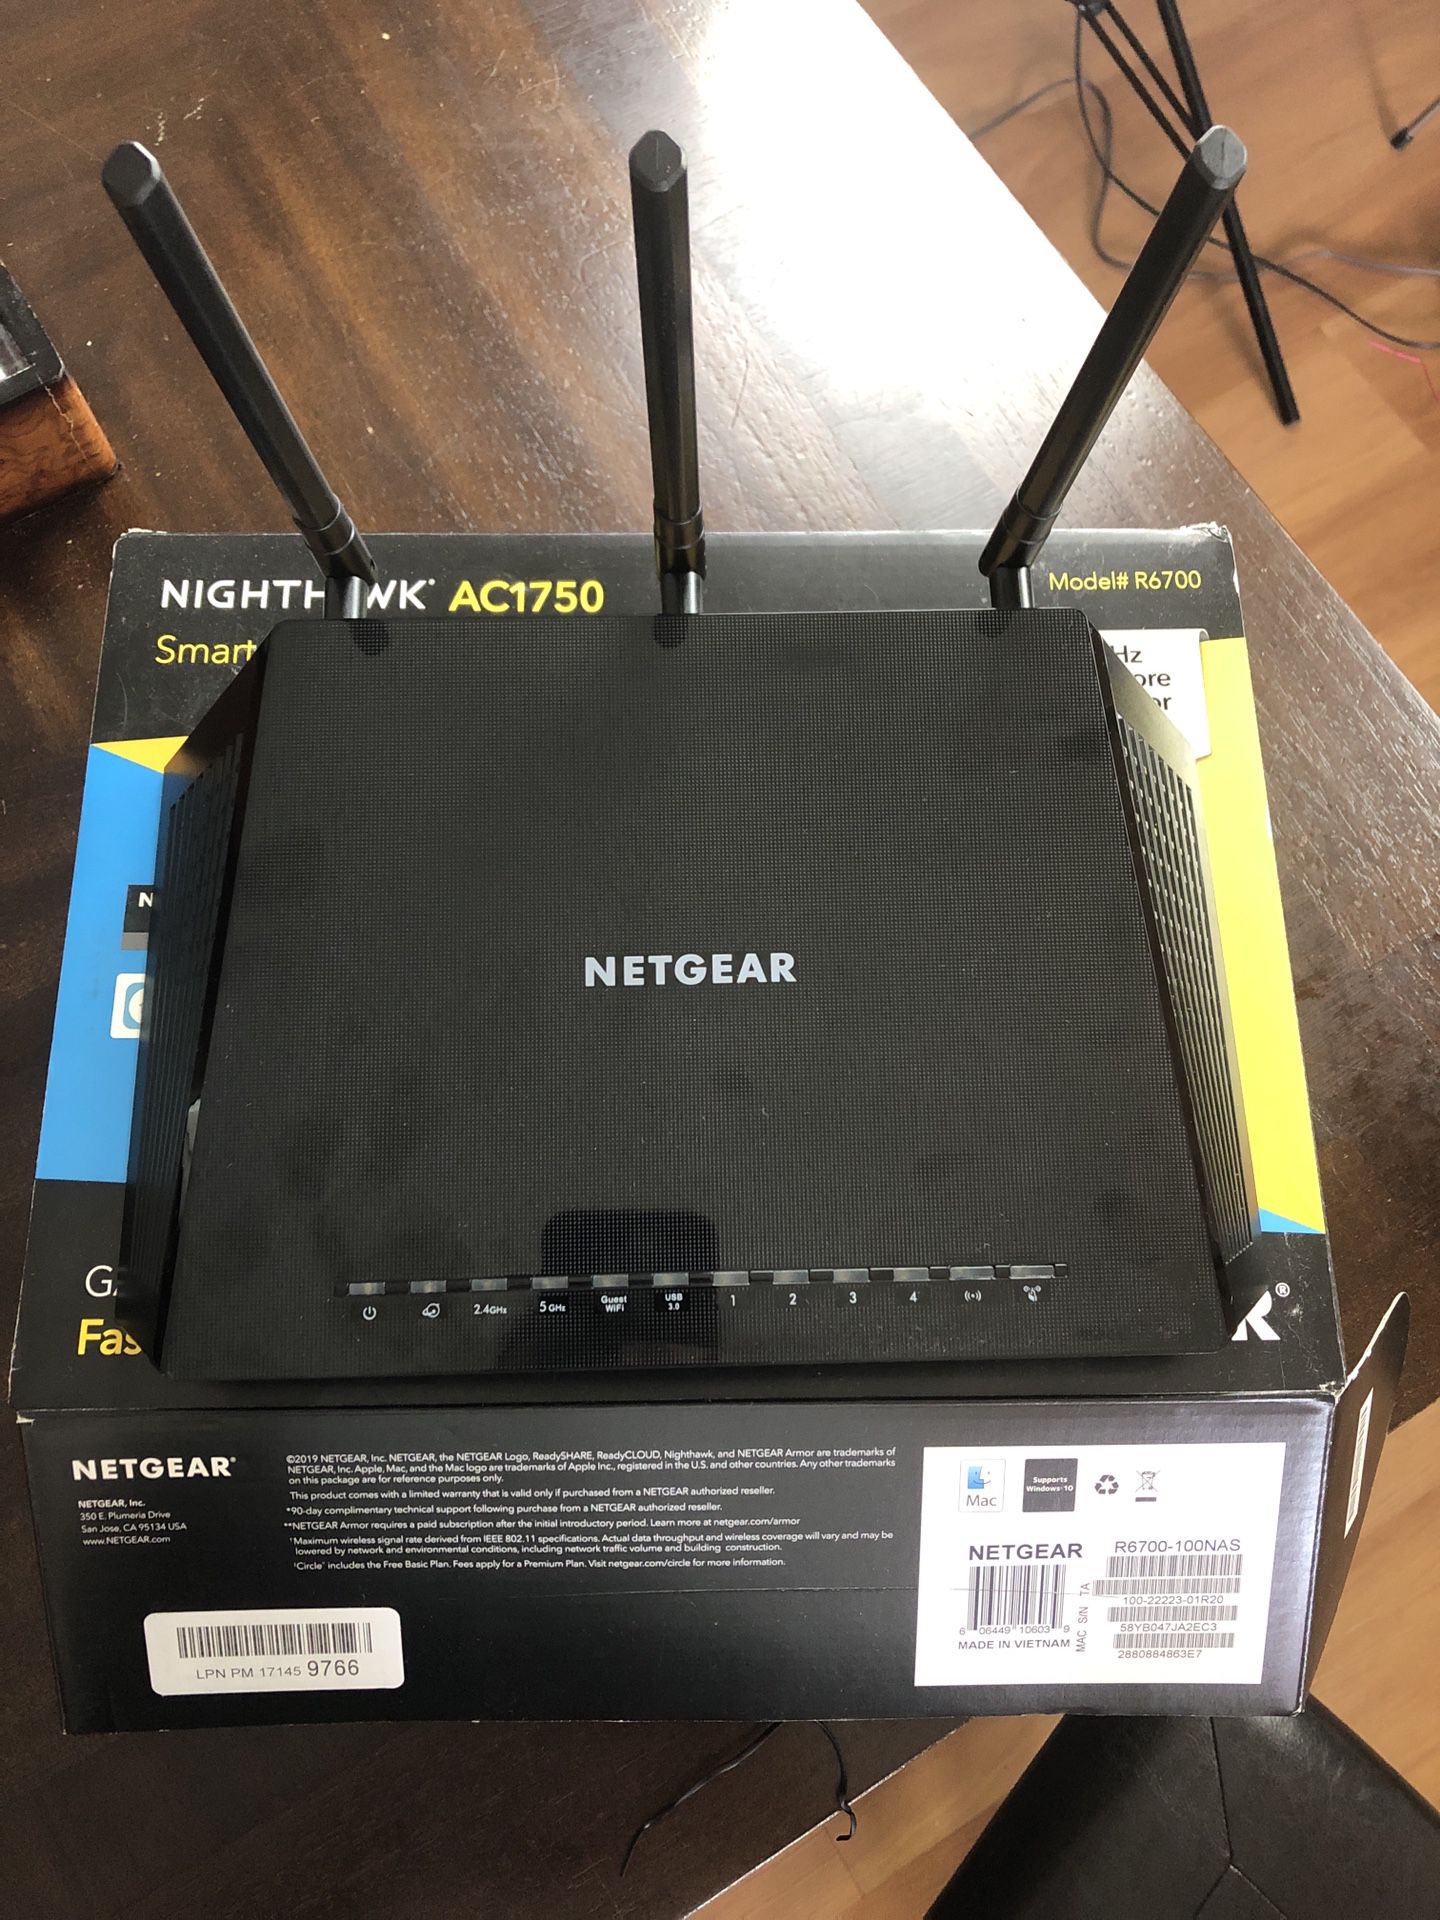 Netgear nighthawk ac1750 smart wifi router . Gaming /streaming faster for mobile devices .